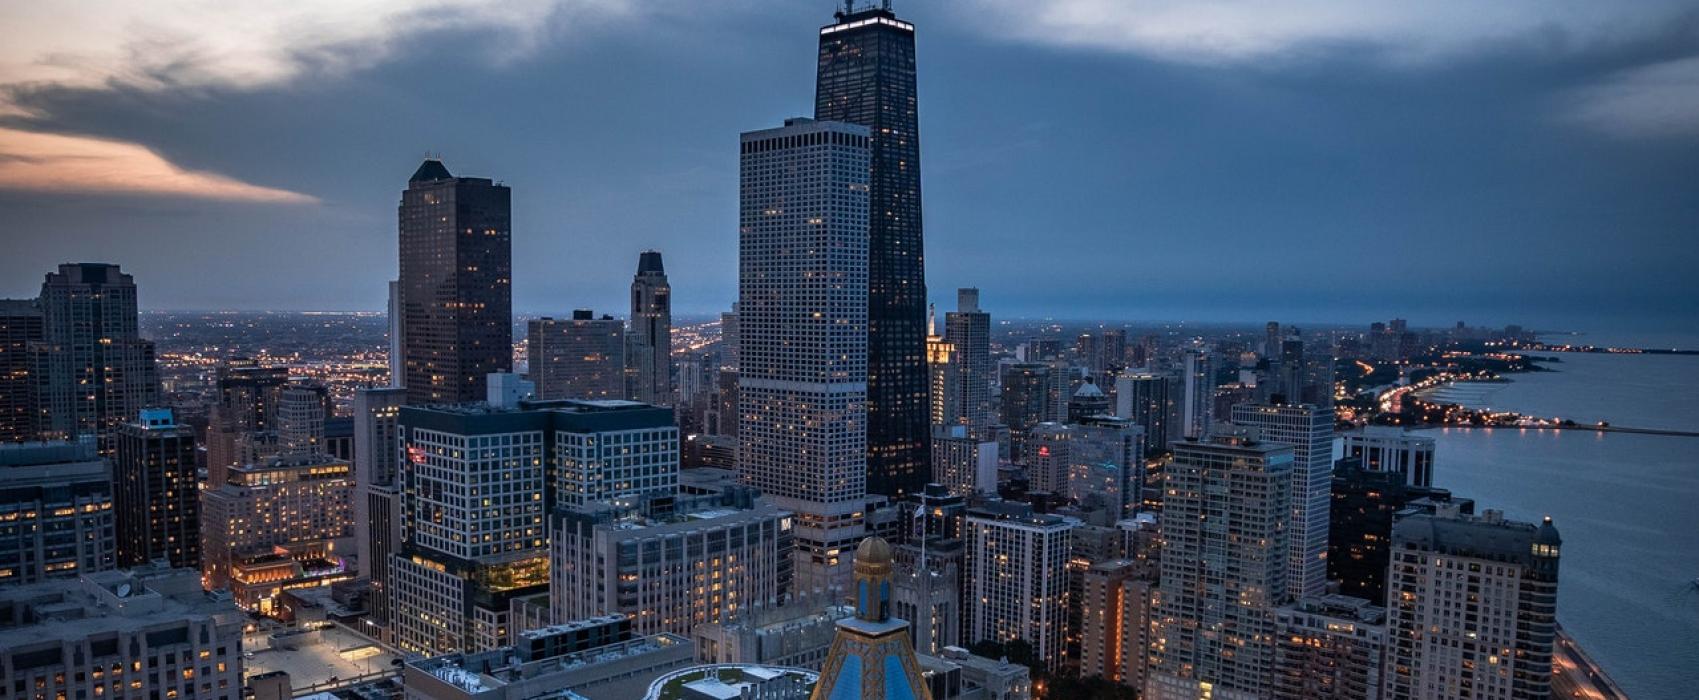 birds-eye view of Chicago's Magnificent Mile